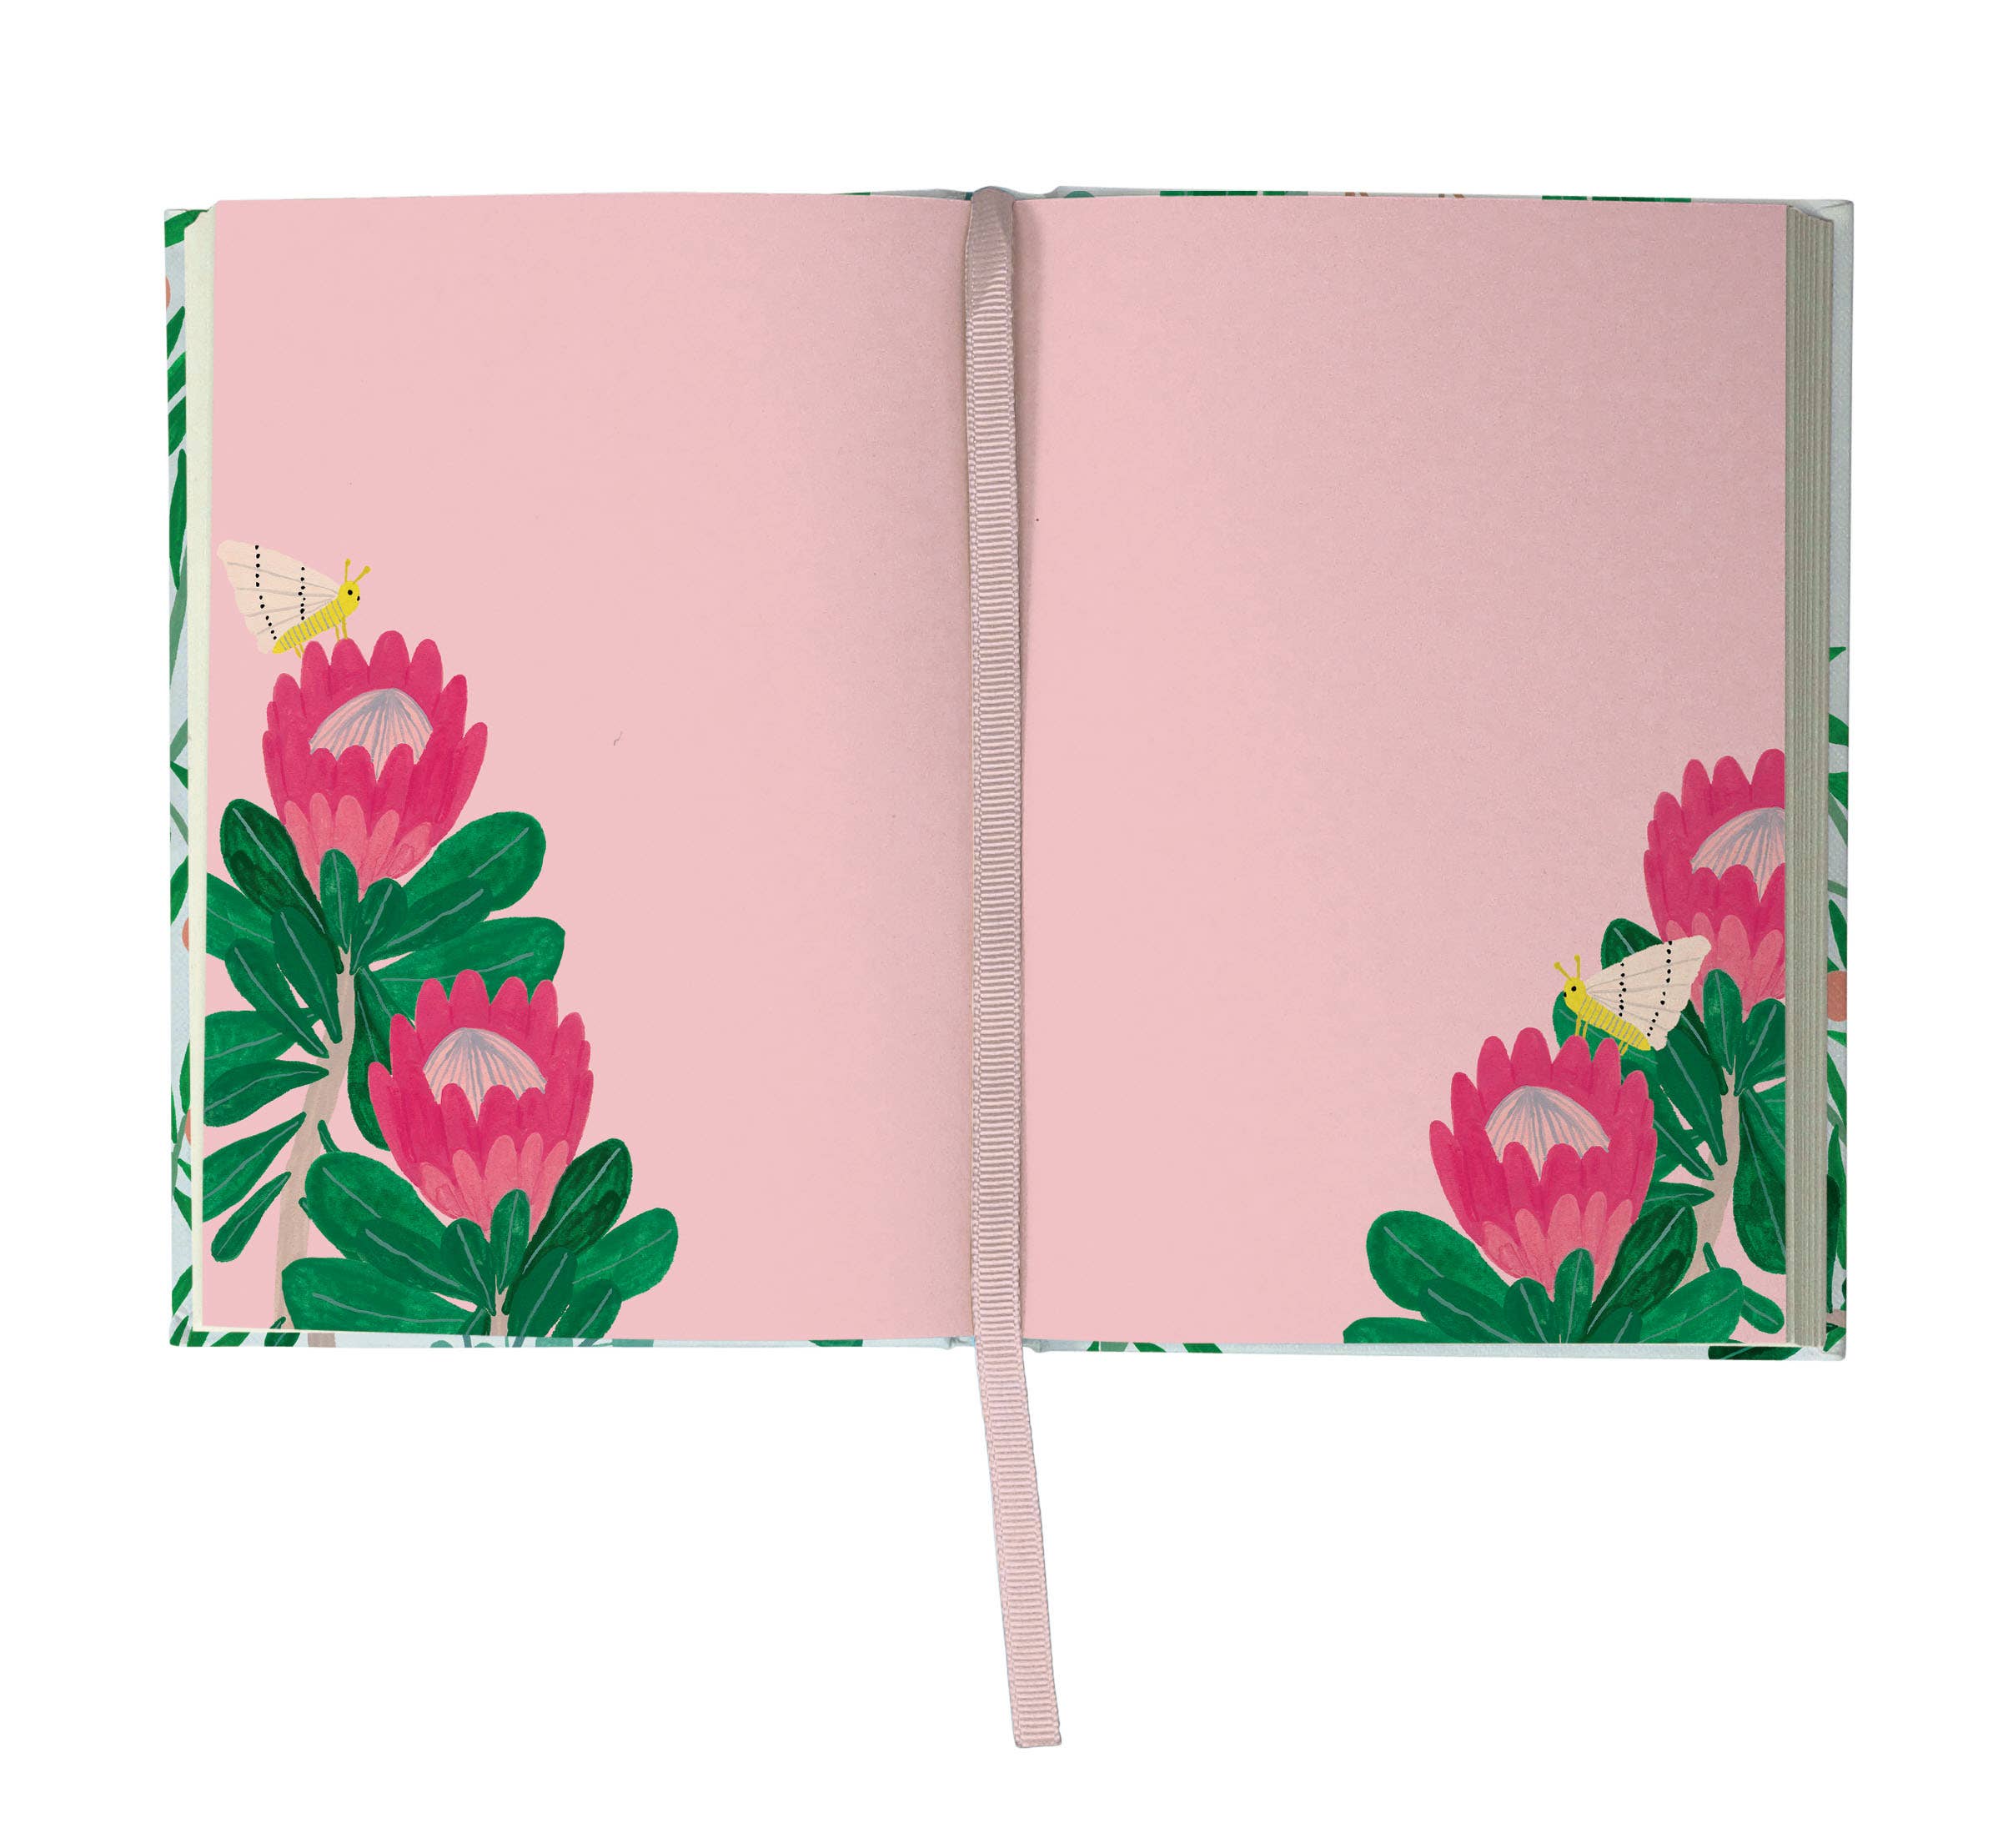 King Protea Illustrated journal